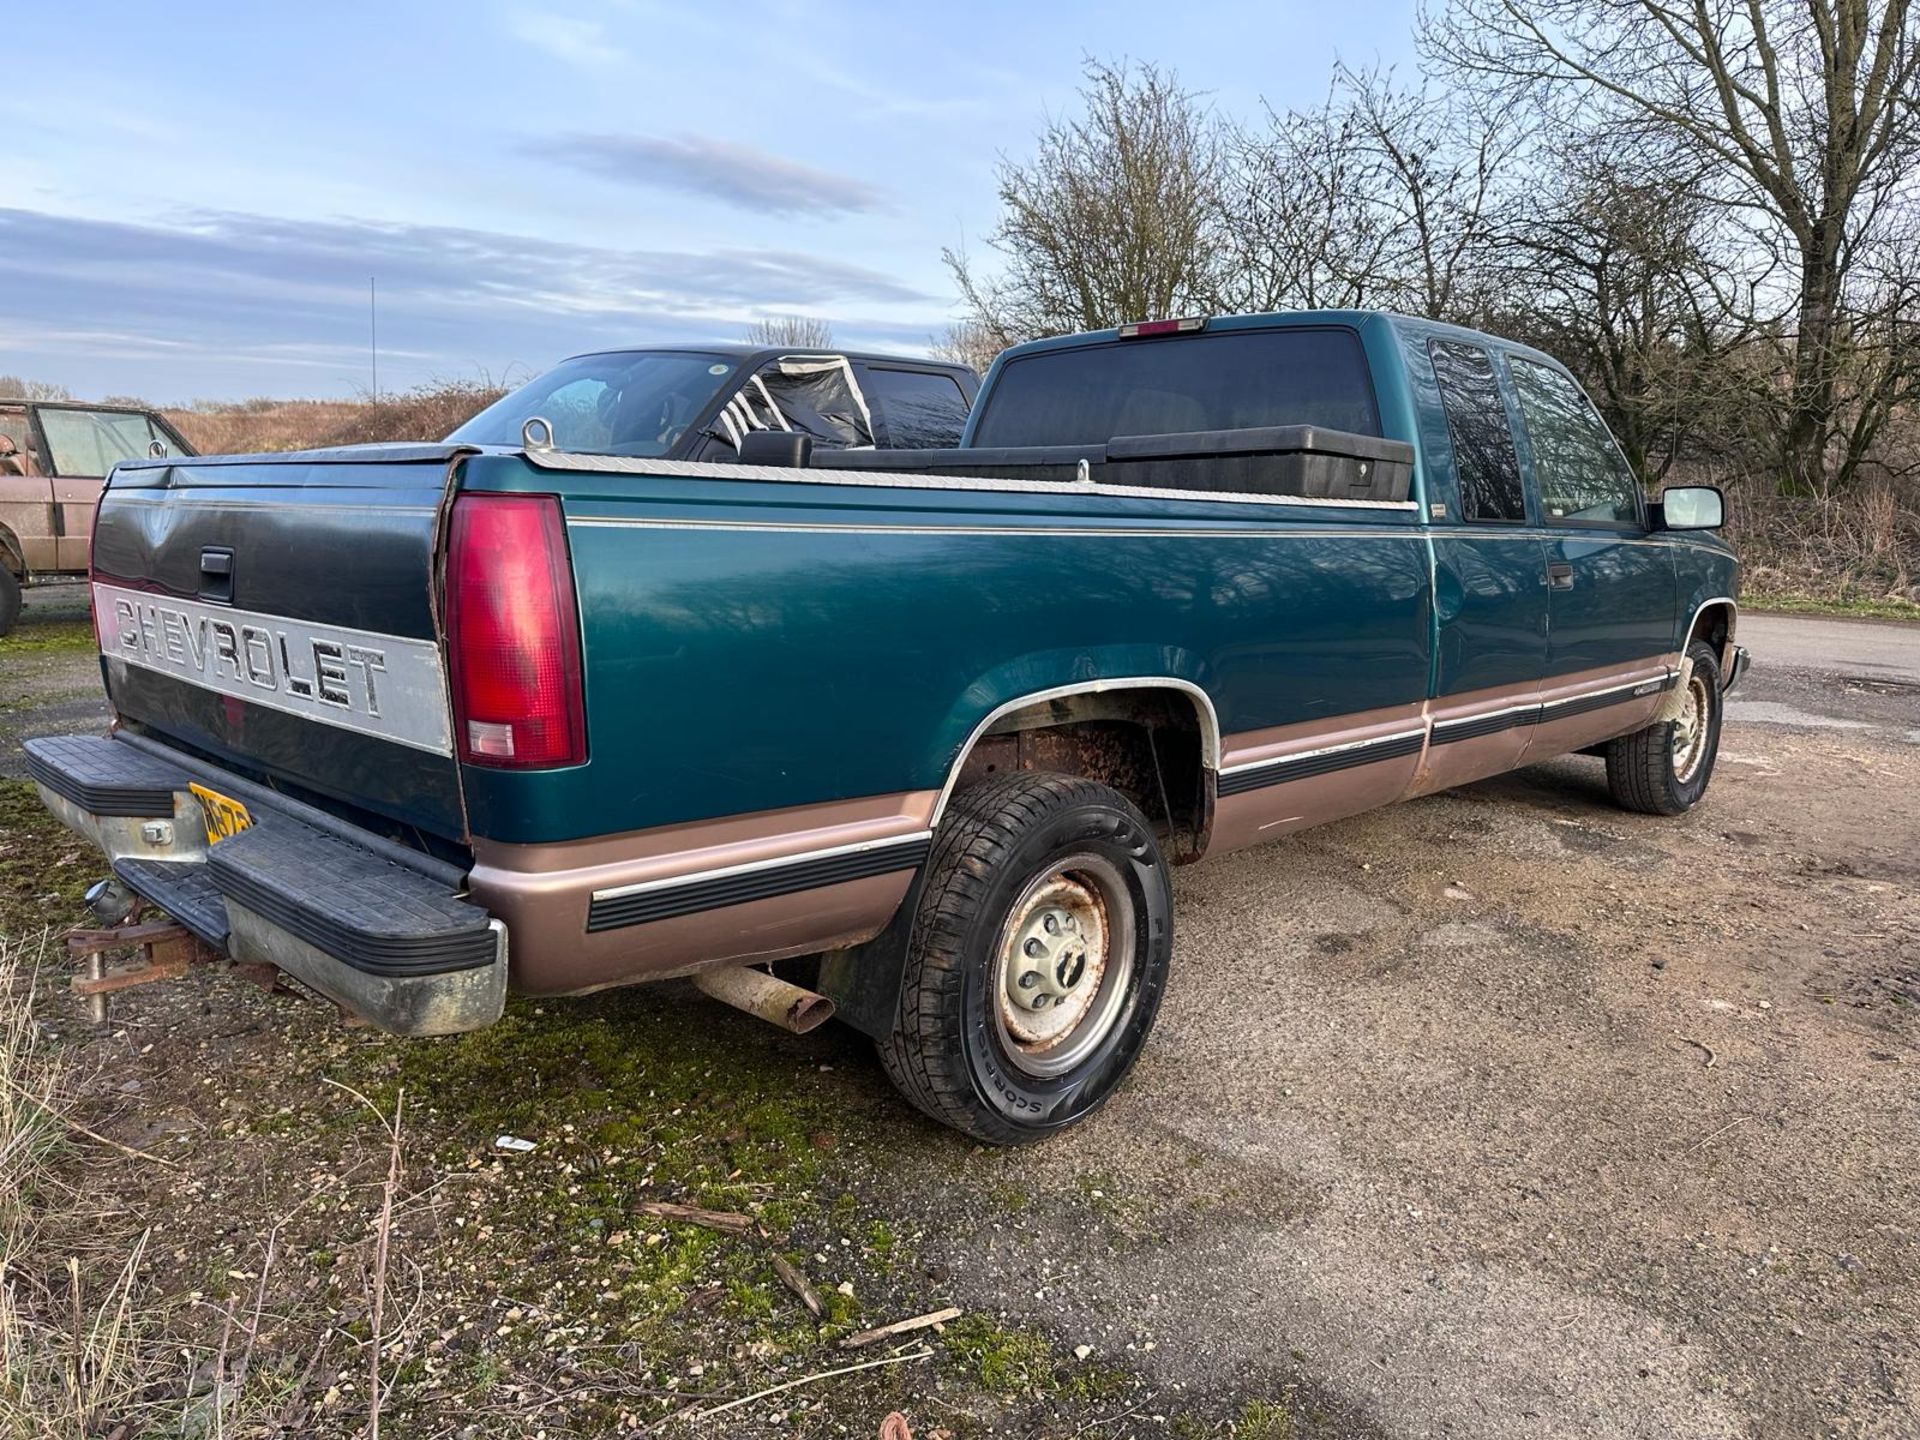 1995 CHEVROLET C2500 - 6.5 V8 TURBO DIESEL - AUTOMATIC GEARBOX - 129,646 MILES - Image 8 of 11